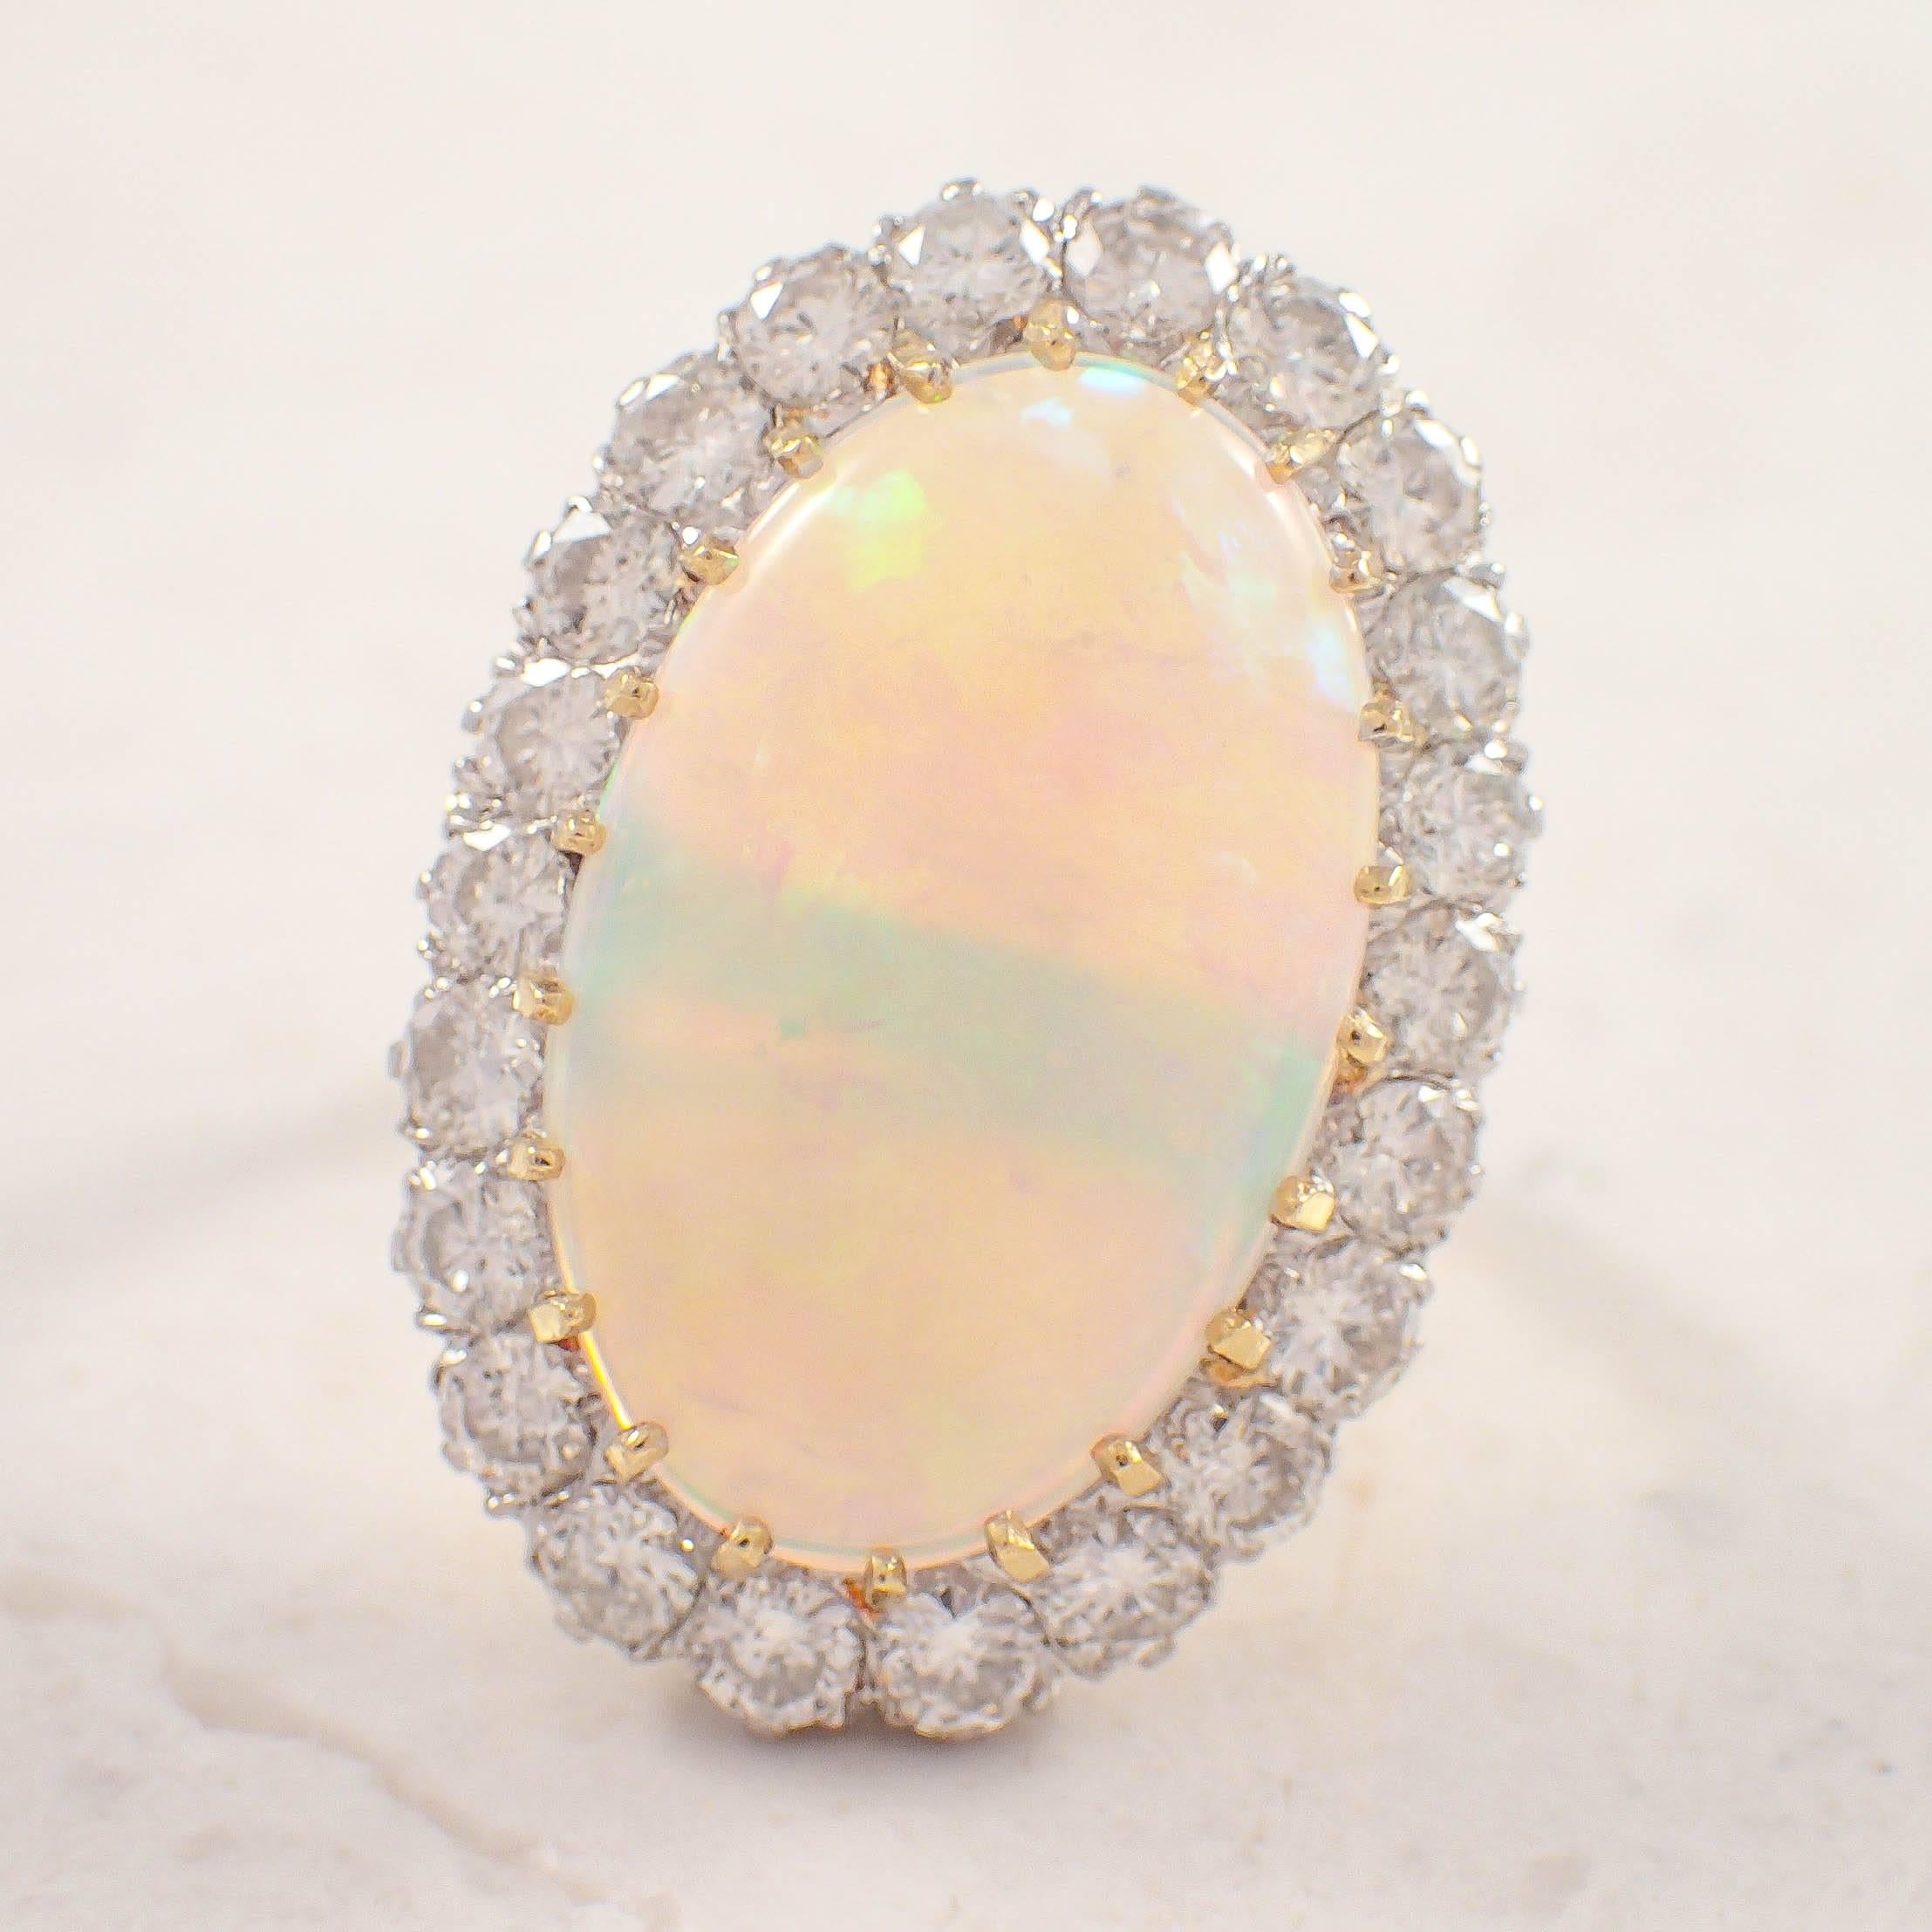 18K Yellow gold opal and diamond ring. The cluster style ring is set with one oval opal measuring 20 X 12.5 mm surrounded by 22 round diamonds weighing approximately 2.00 carats total. The ring weighs 5.1 DWTs/ 7.9 grams. Size 5.5. Circa